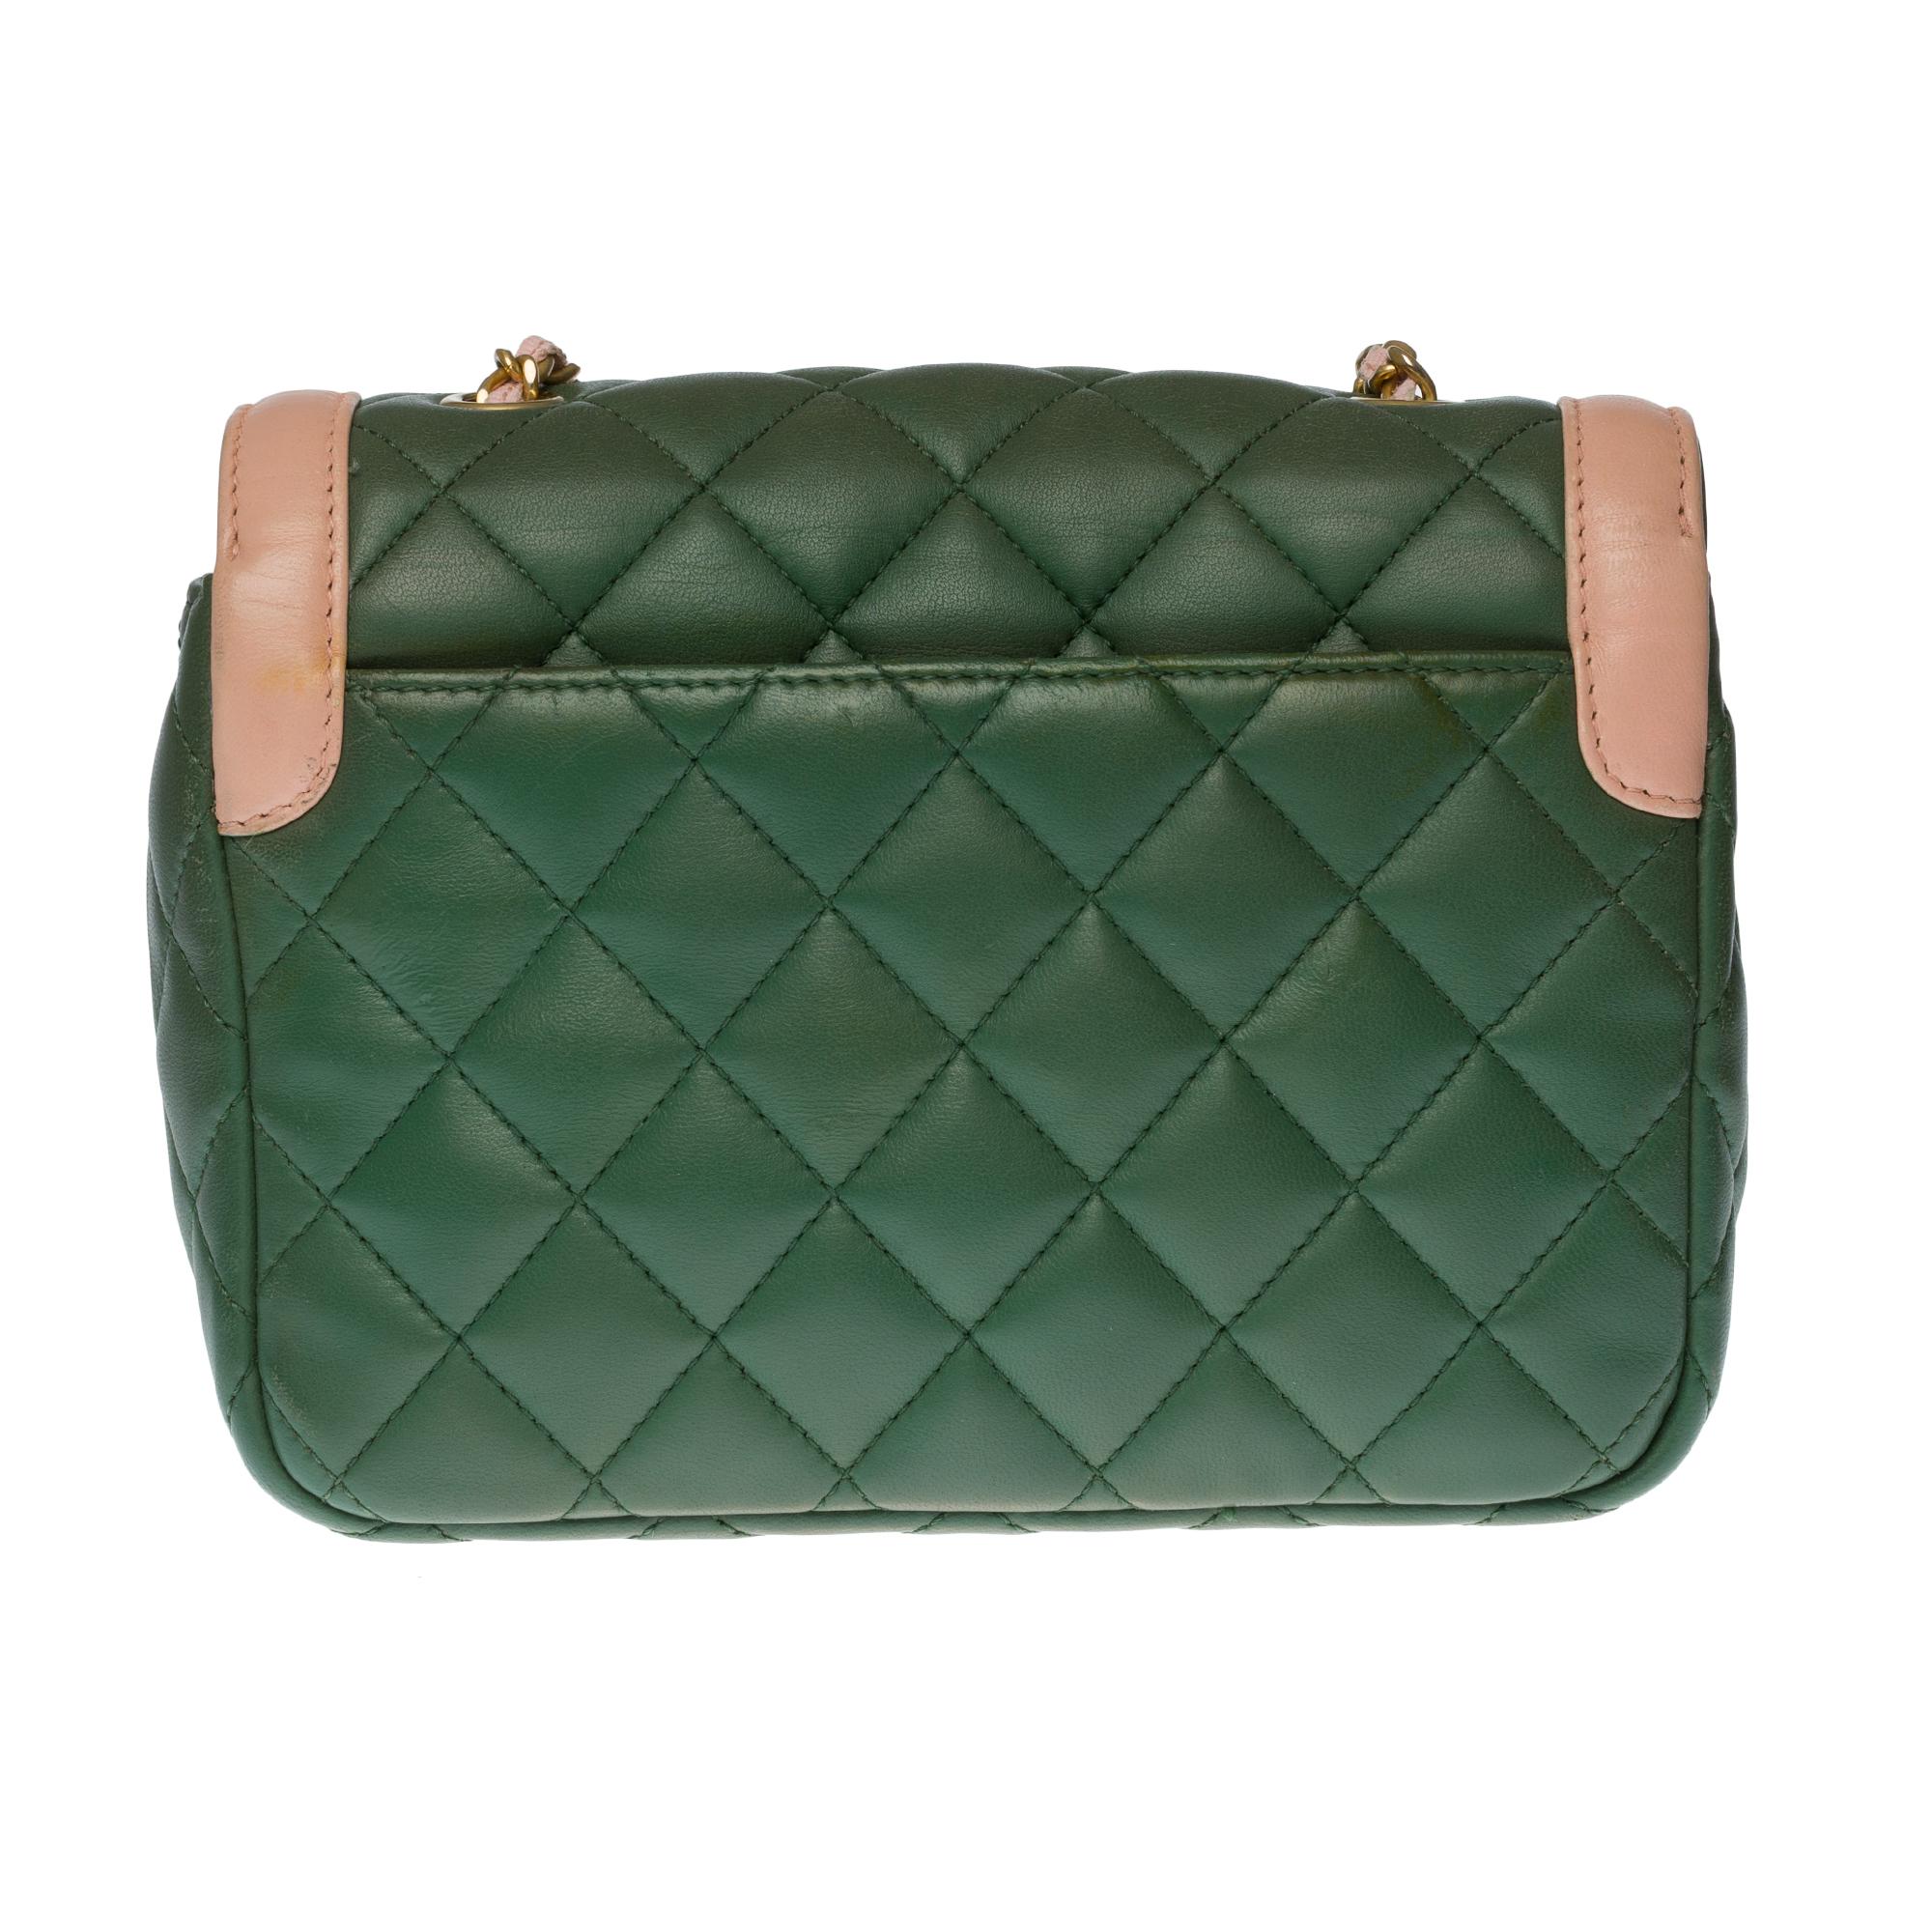 Splendid & Rare Chanel Diana two-tone bag single flap in Olive Green & Pink quilted leather , gold metal hardware, golden metal handle intertwined with pink leather allowing a hand, shoulder or shoulder strap.
Quilted flap closure, gold metal CC